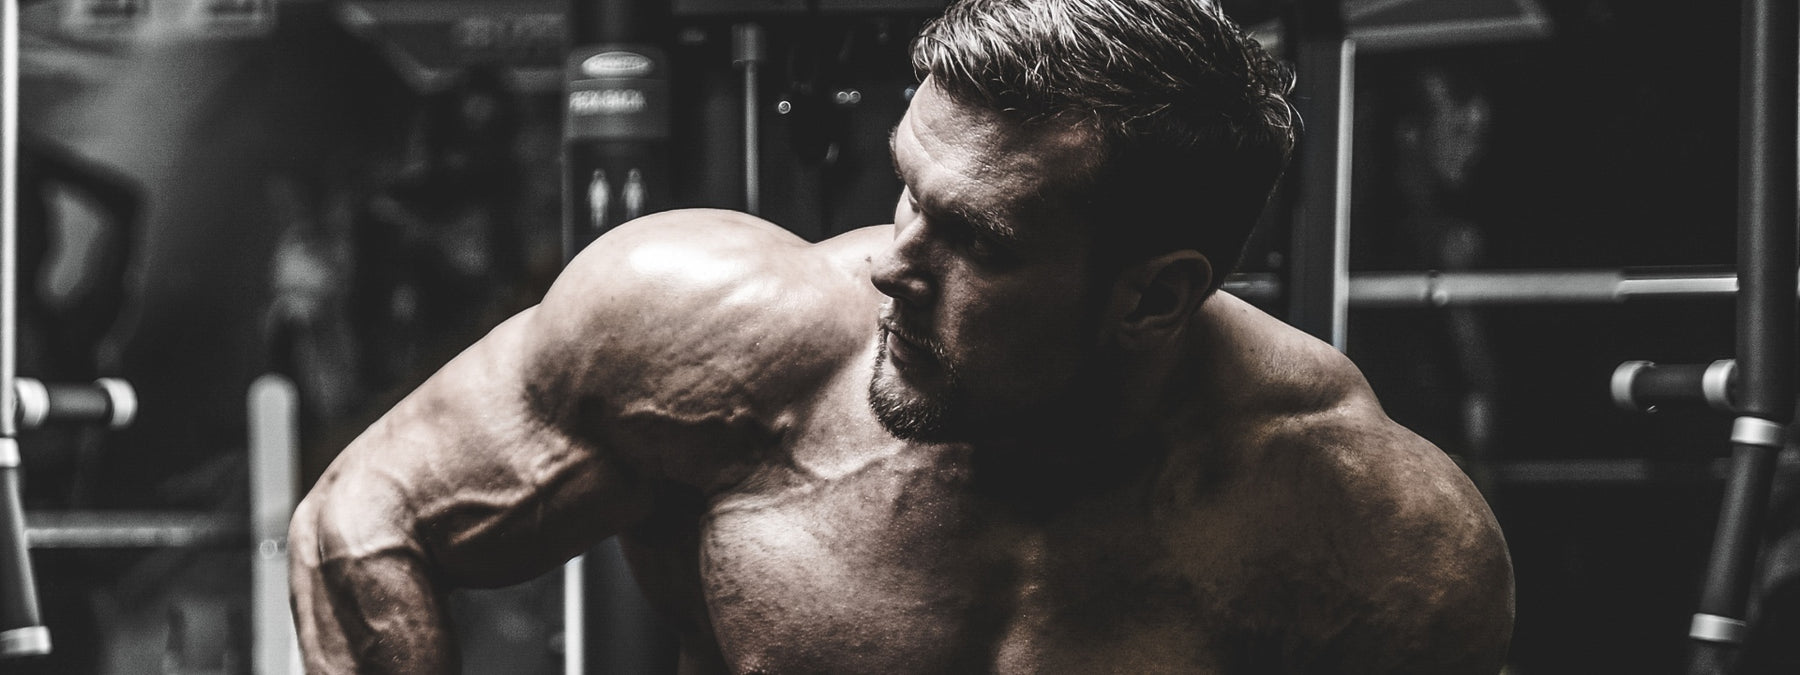 Dangers of Competition - Why Top Physique Competitors Suddenly Pass